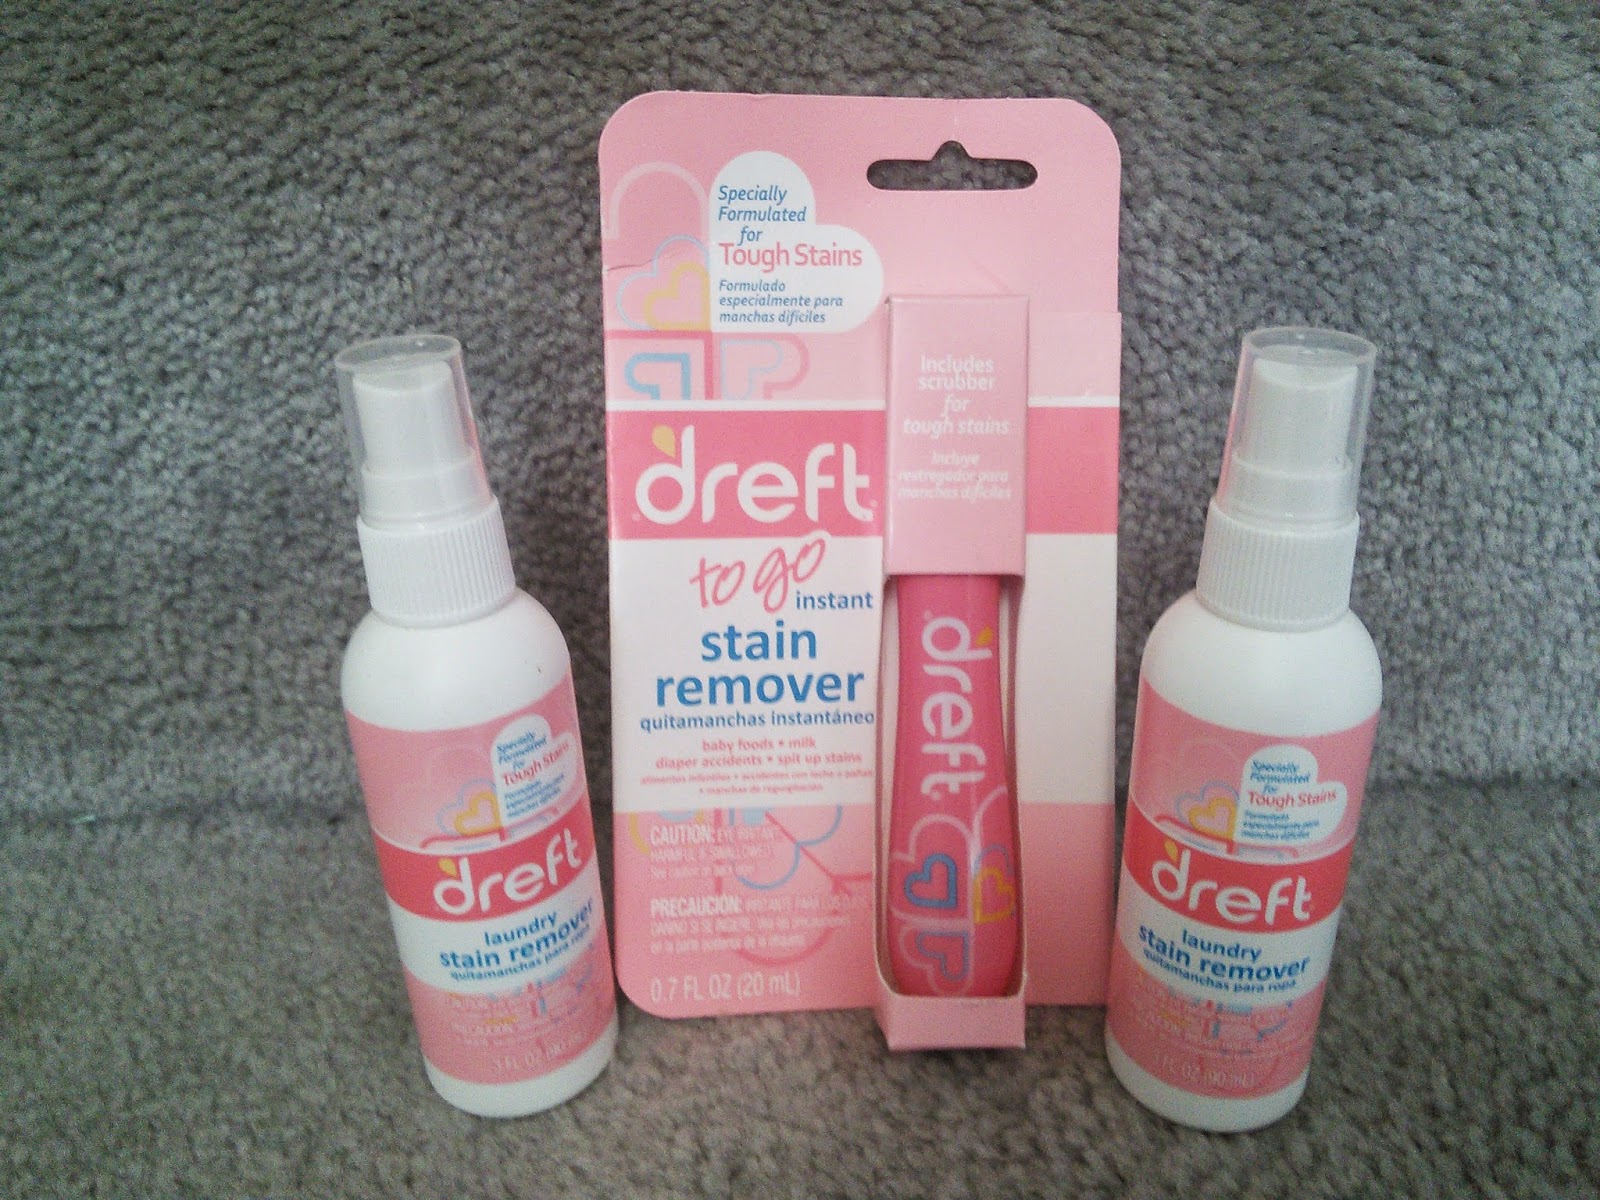 Mom Knows Best: Did You Know Dreft Makes More Than Just Amazing